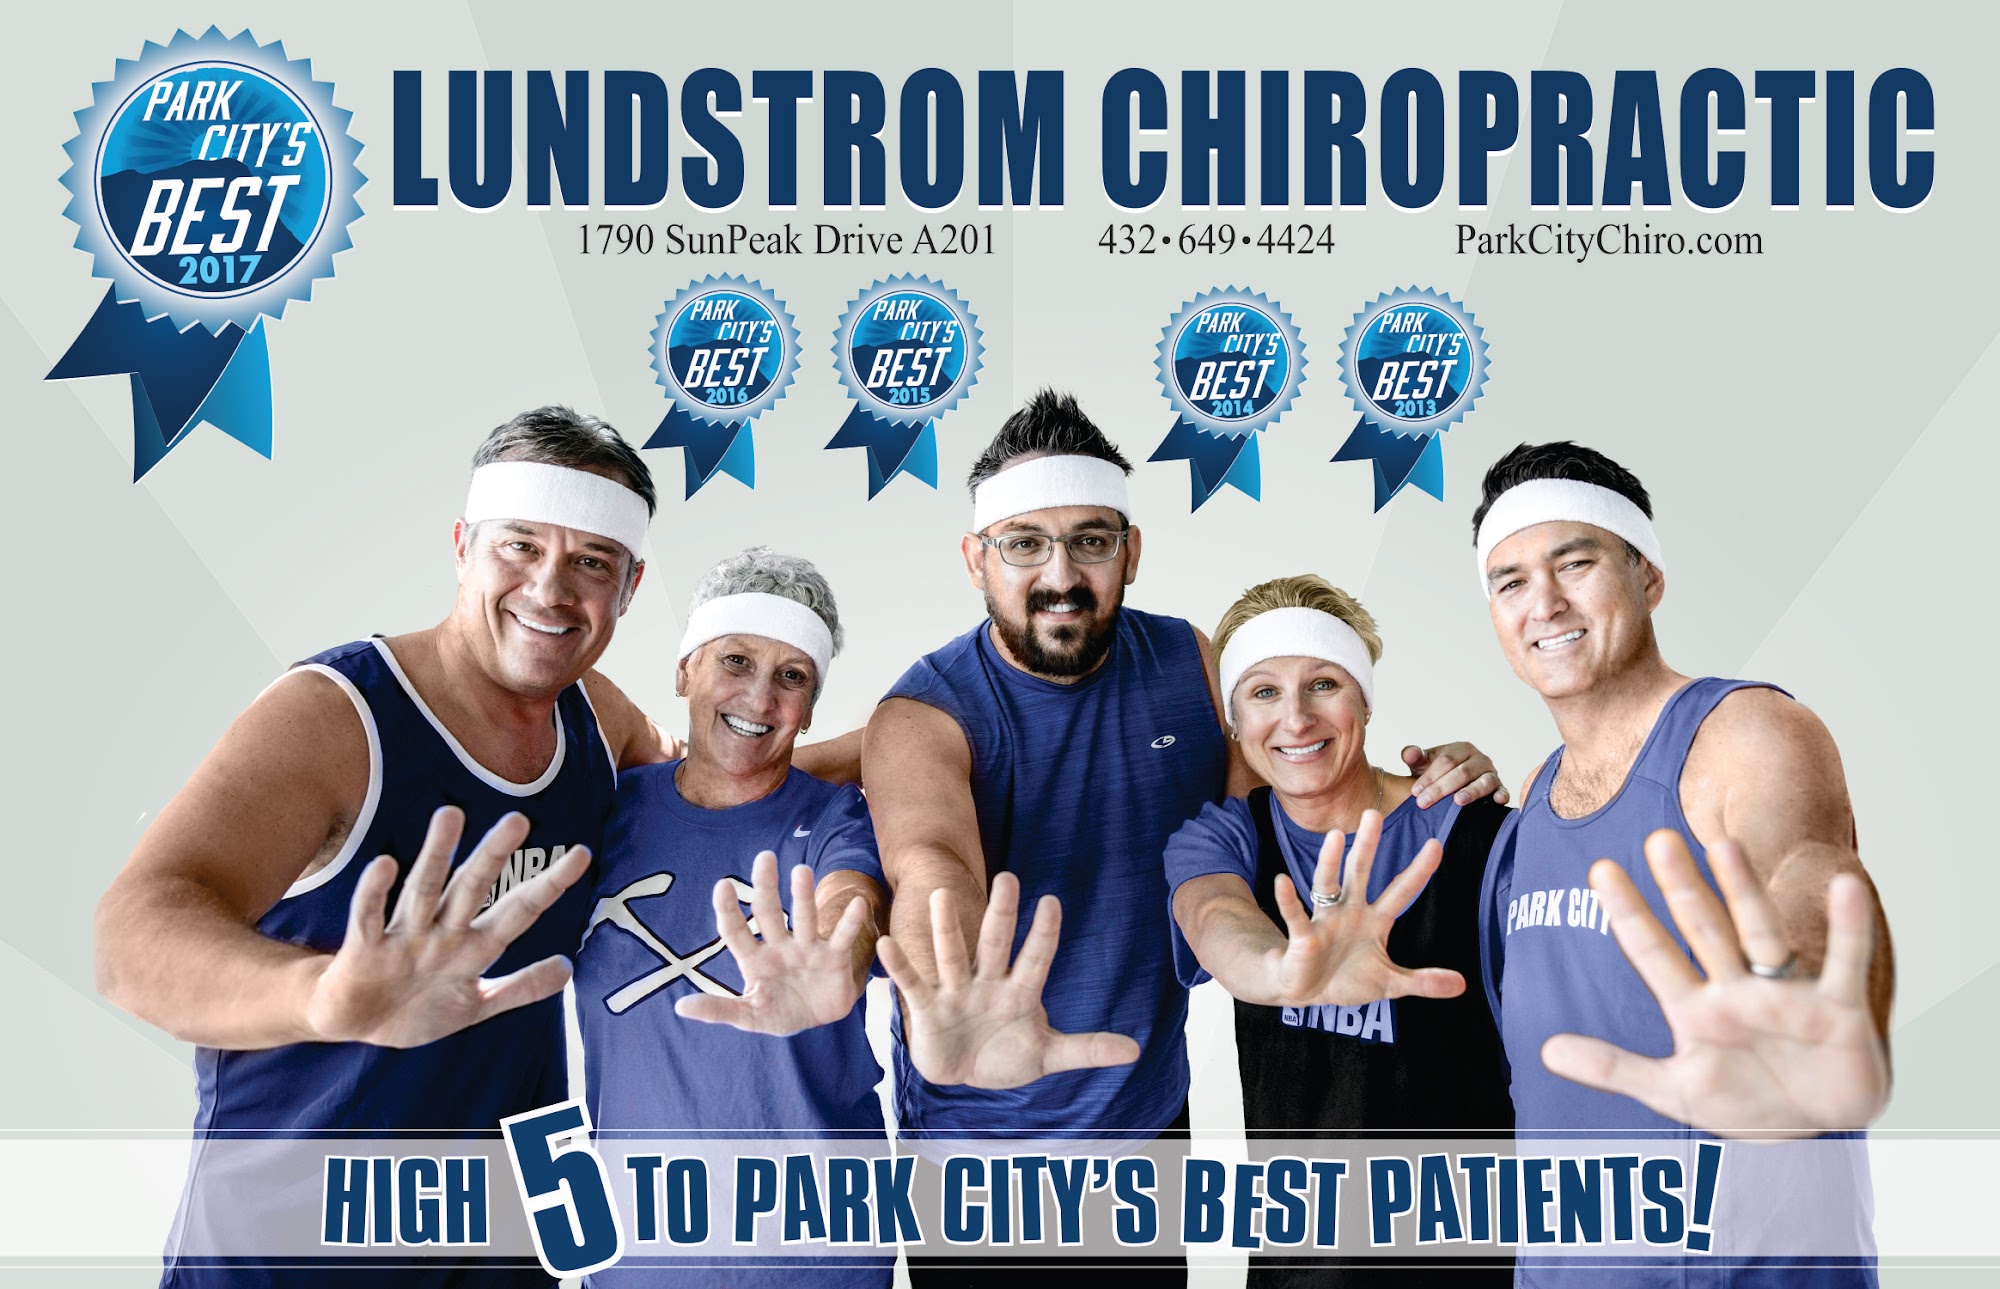 Lundstrom Chiropractic